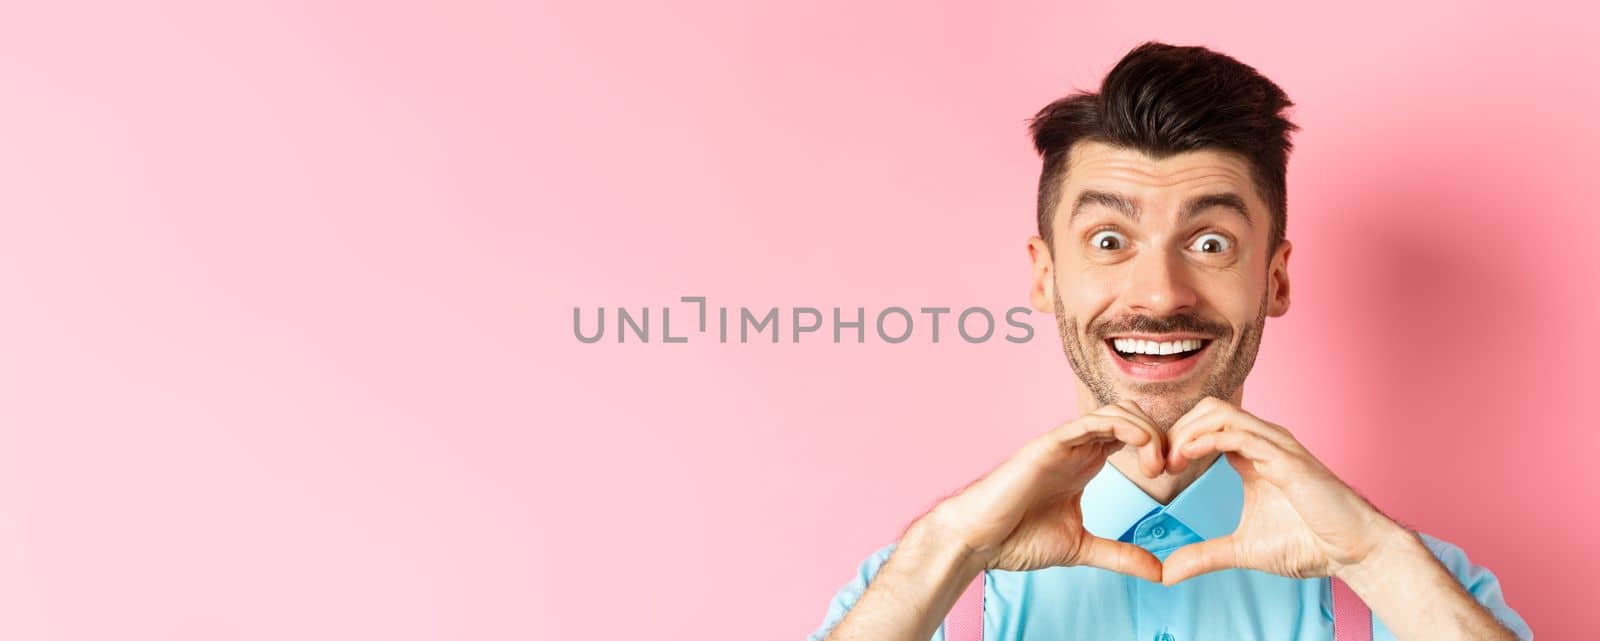 Valentines day concept. Close up of romantic guy looking happy, smiling and showing heart gesture, standing on pink background.